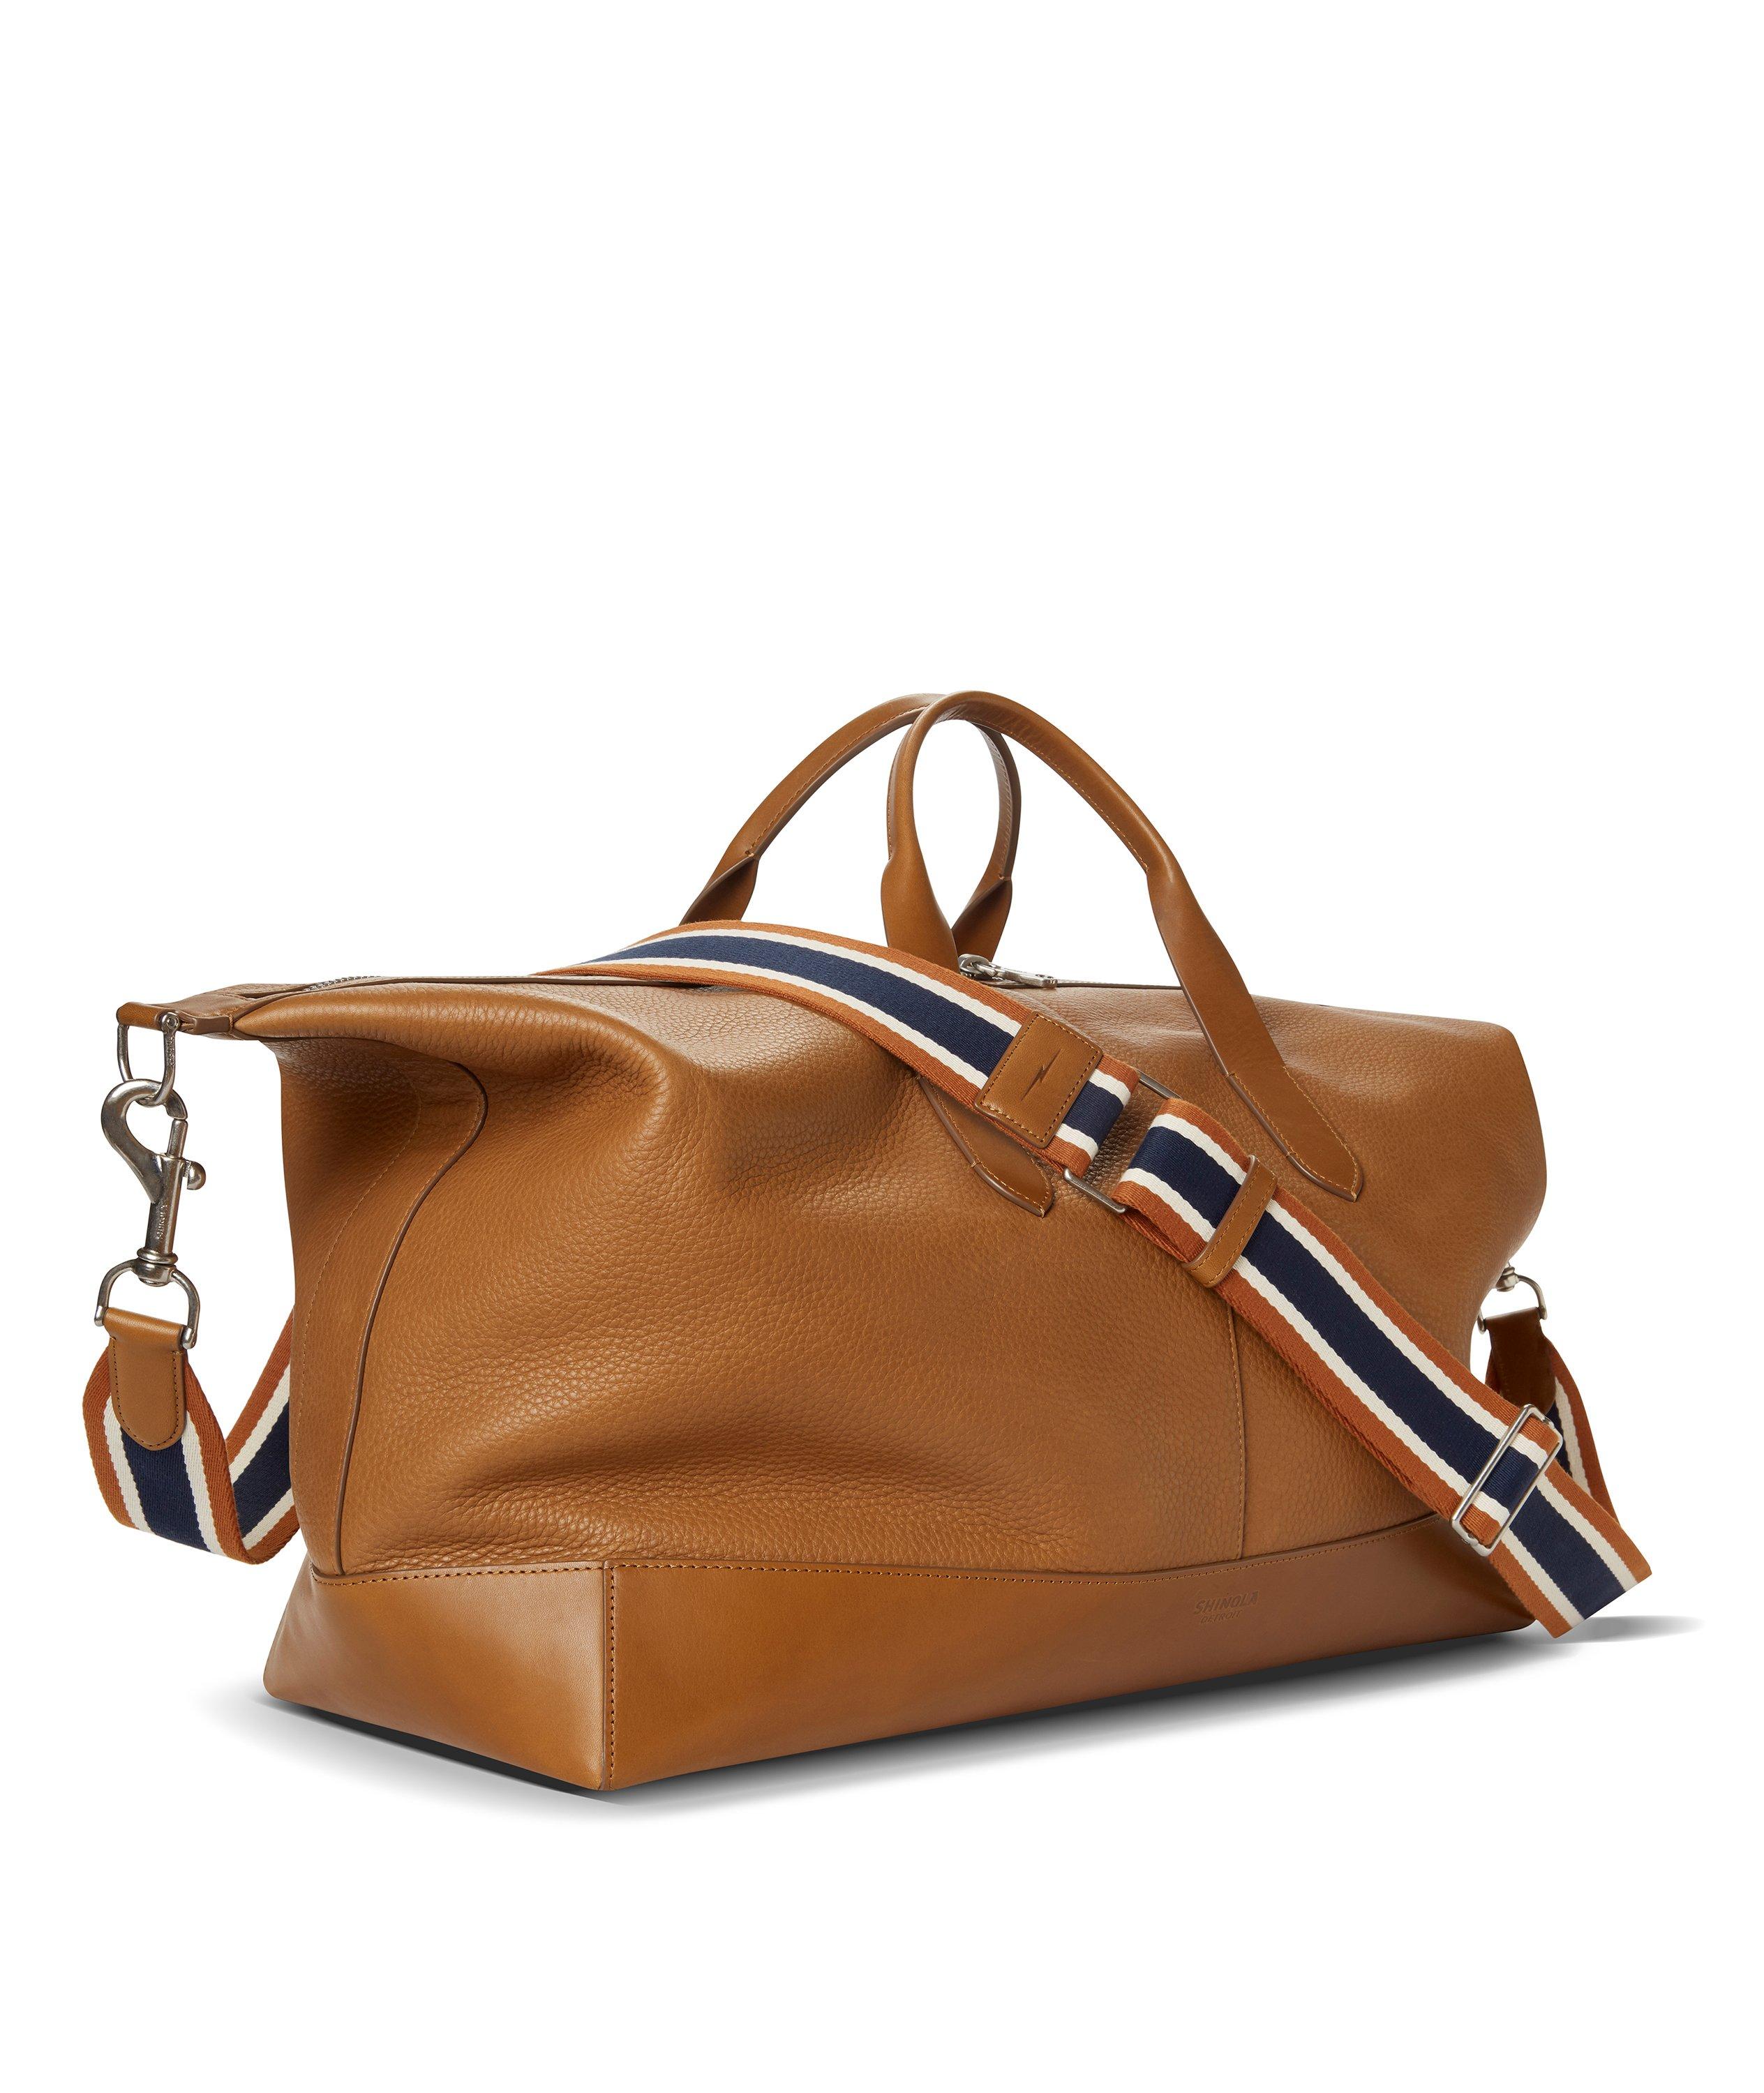 Canfield Classic Holdall Duffle Bag  image 1